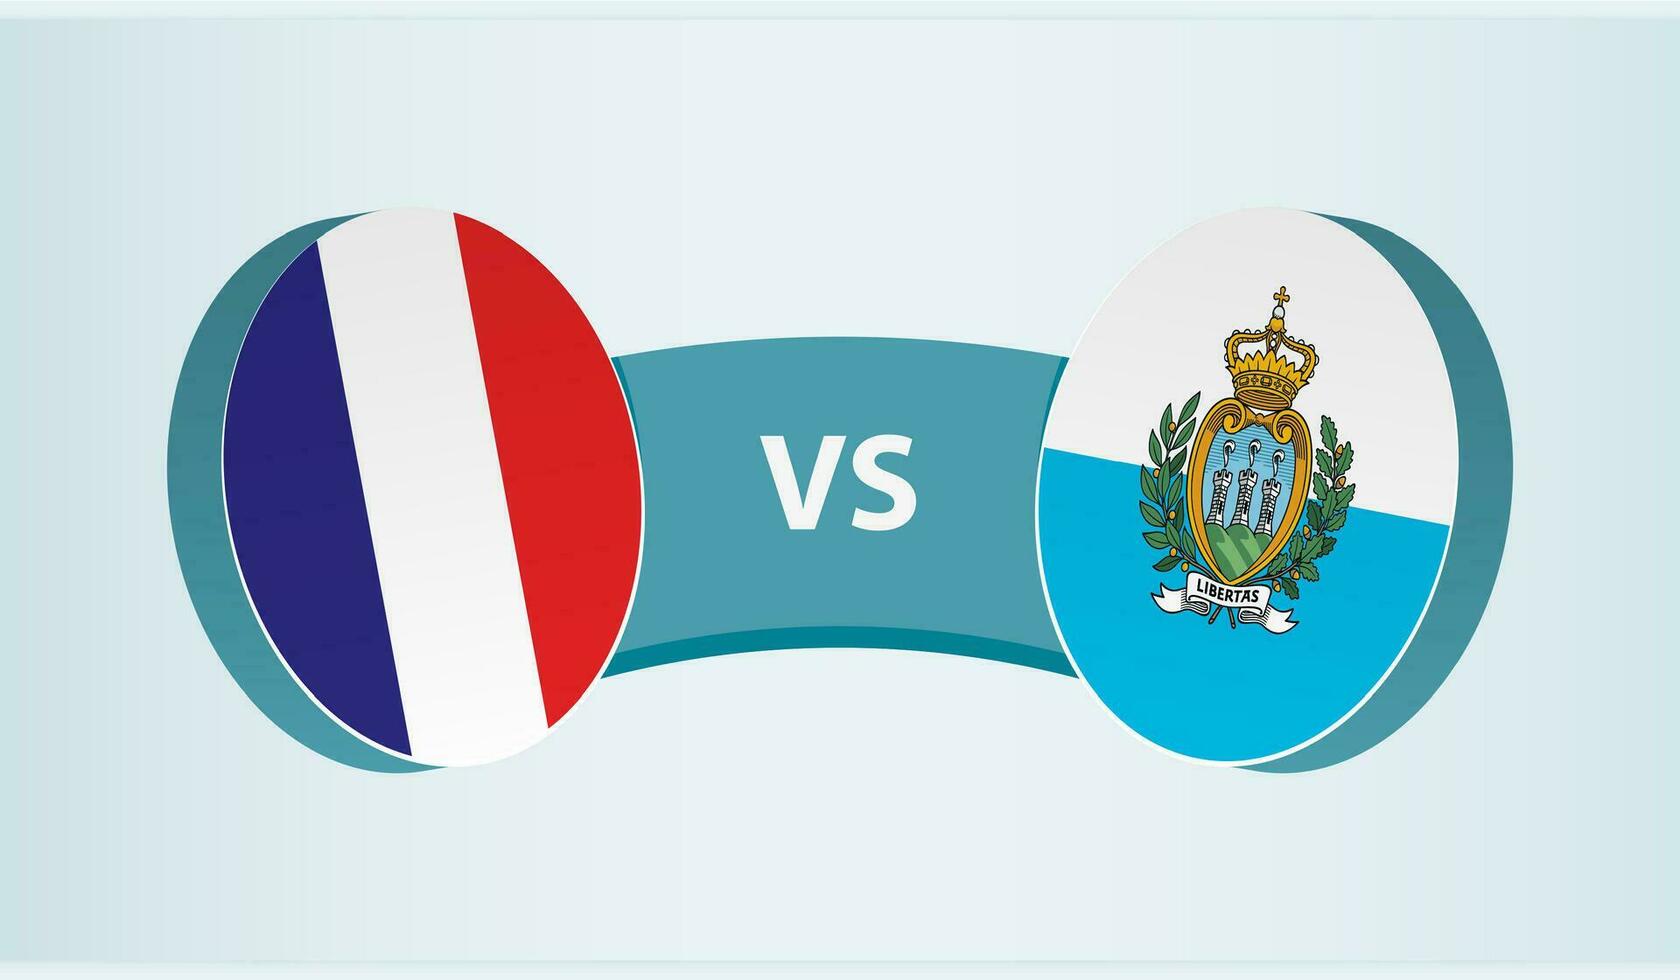 France versus San Marino, team sports competition concept. vector